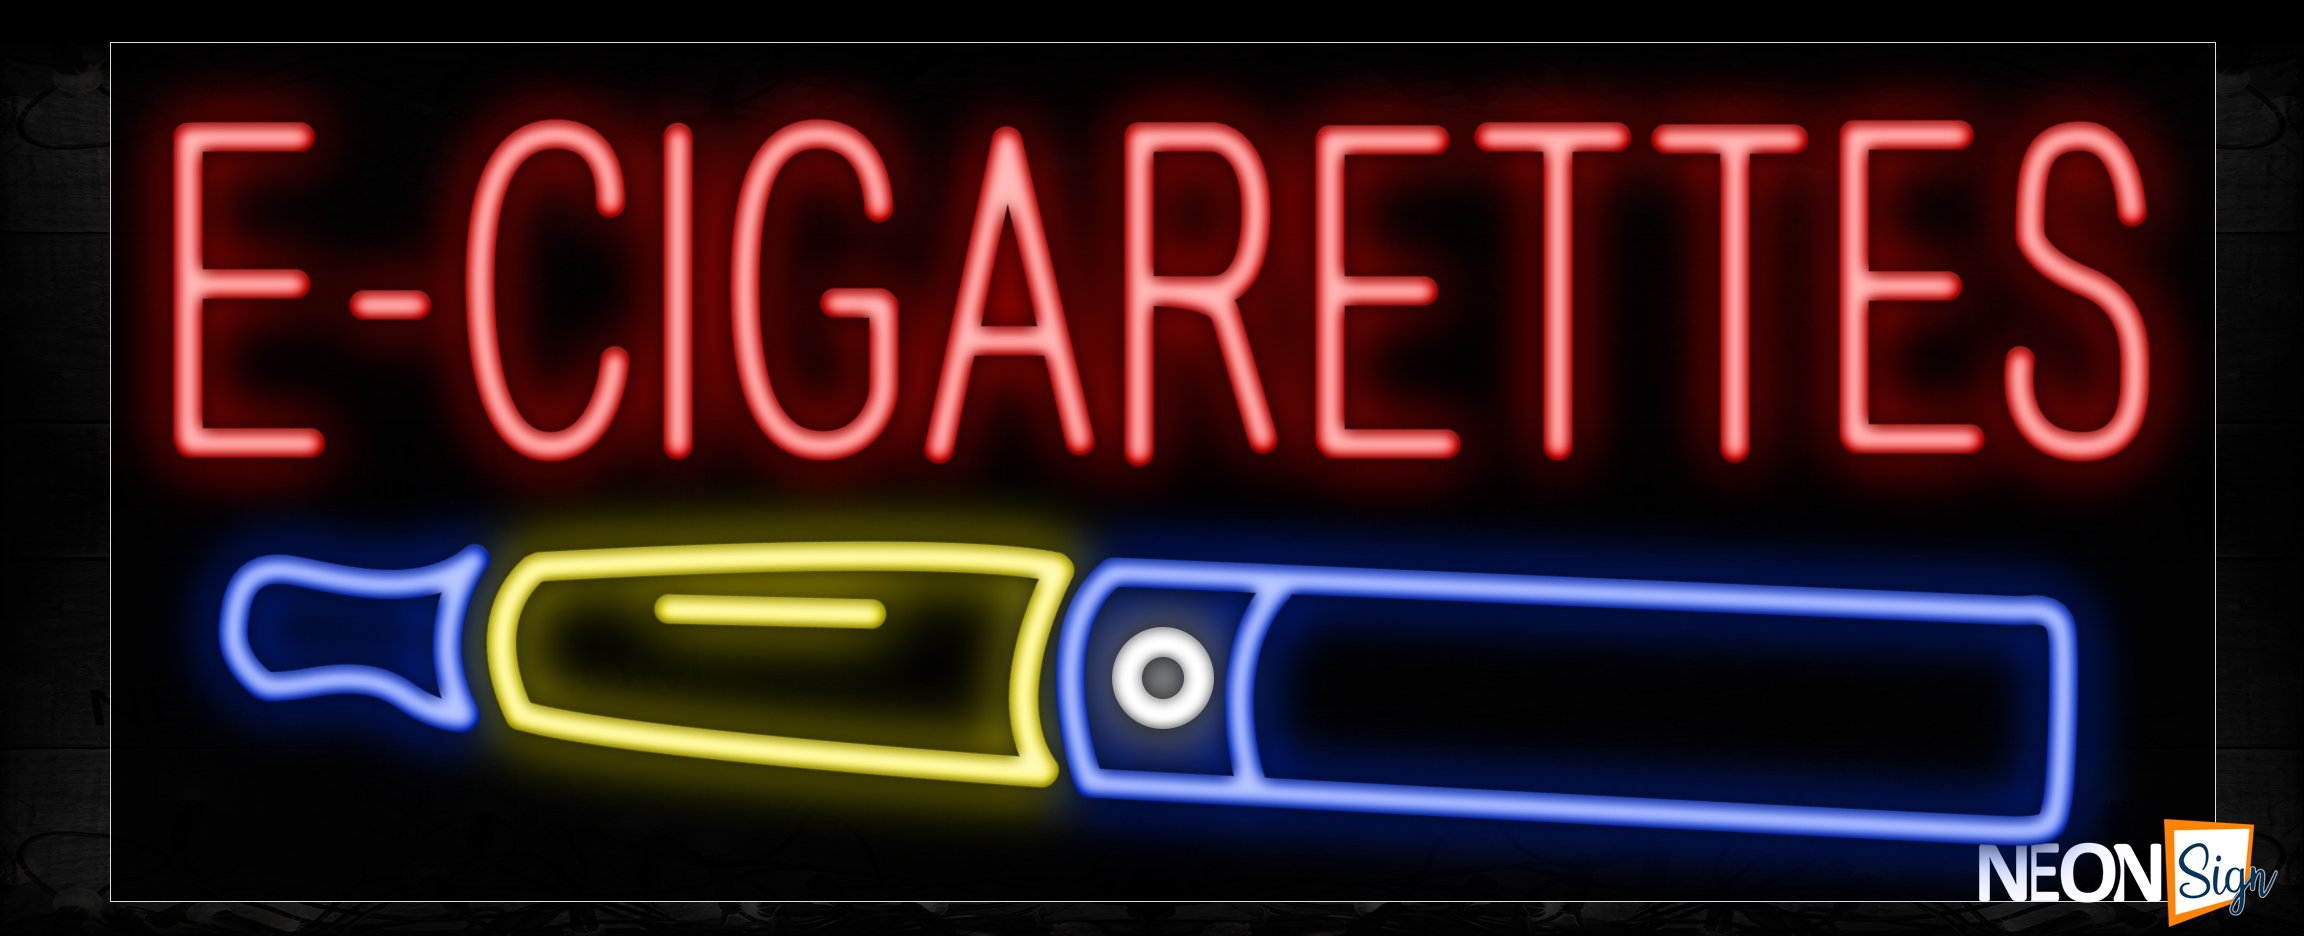 Image of 11385 E-Cigarettes with logo Neon Sign_13x32 Black Backing